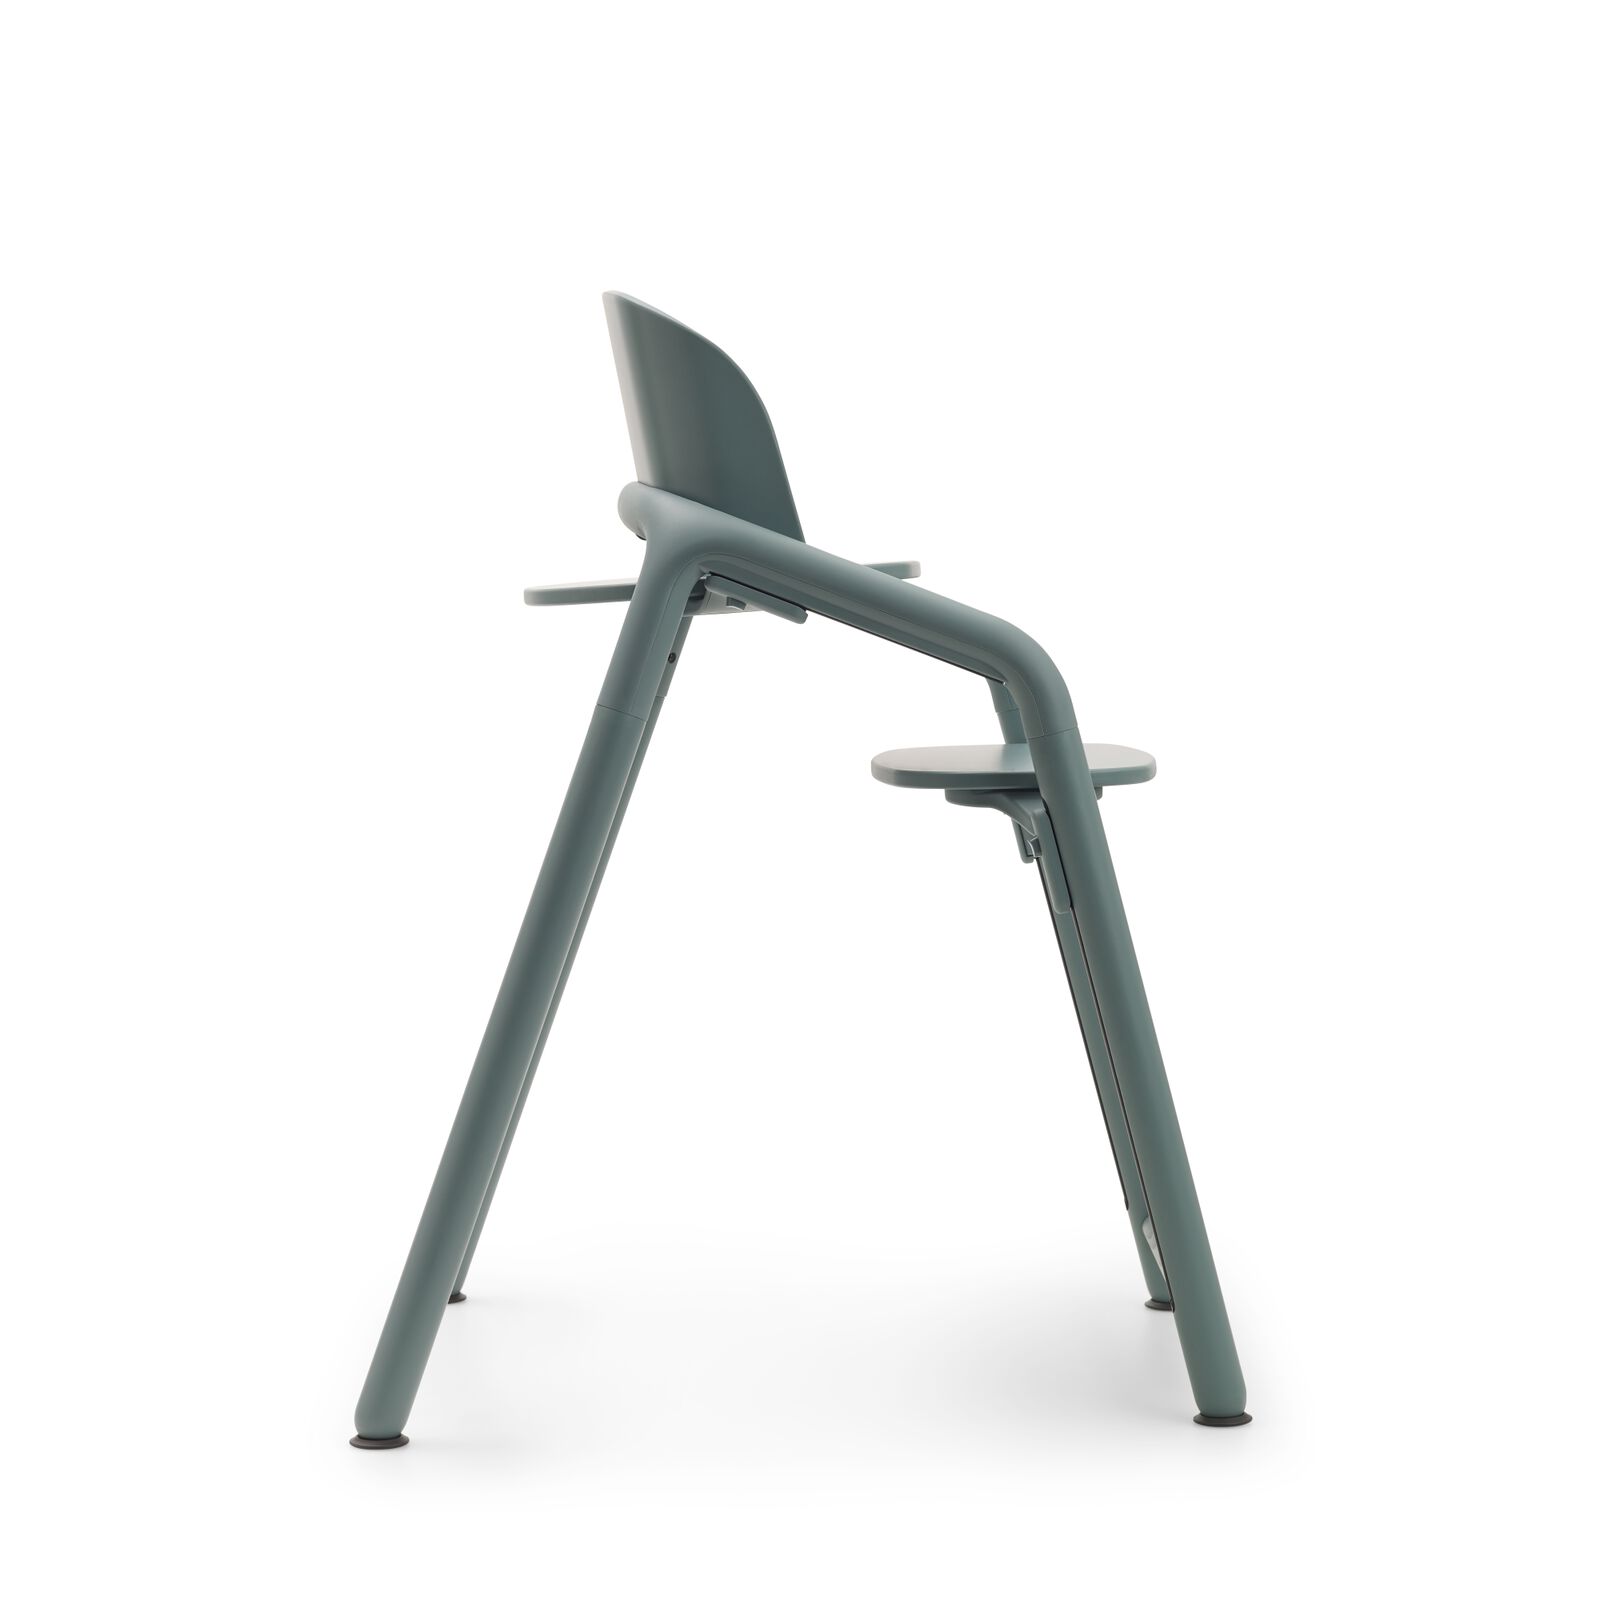 Side view of the Bugaboo Giraffe chair in blue.